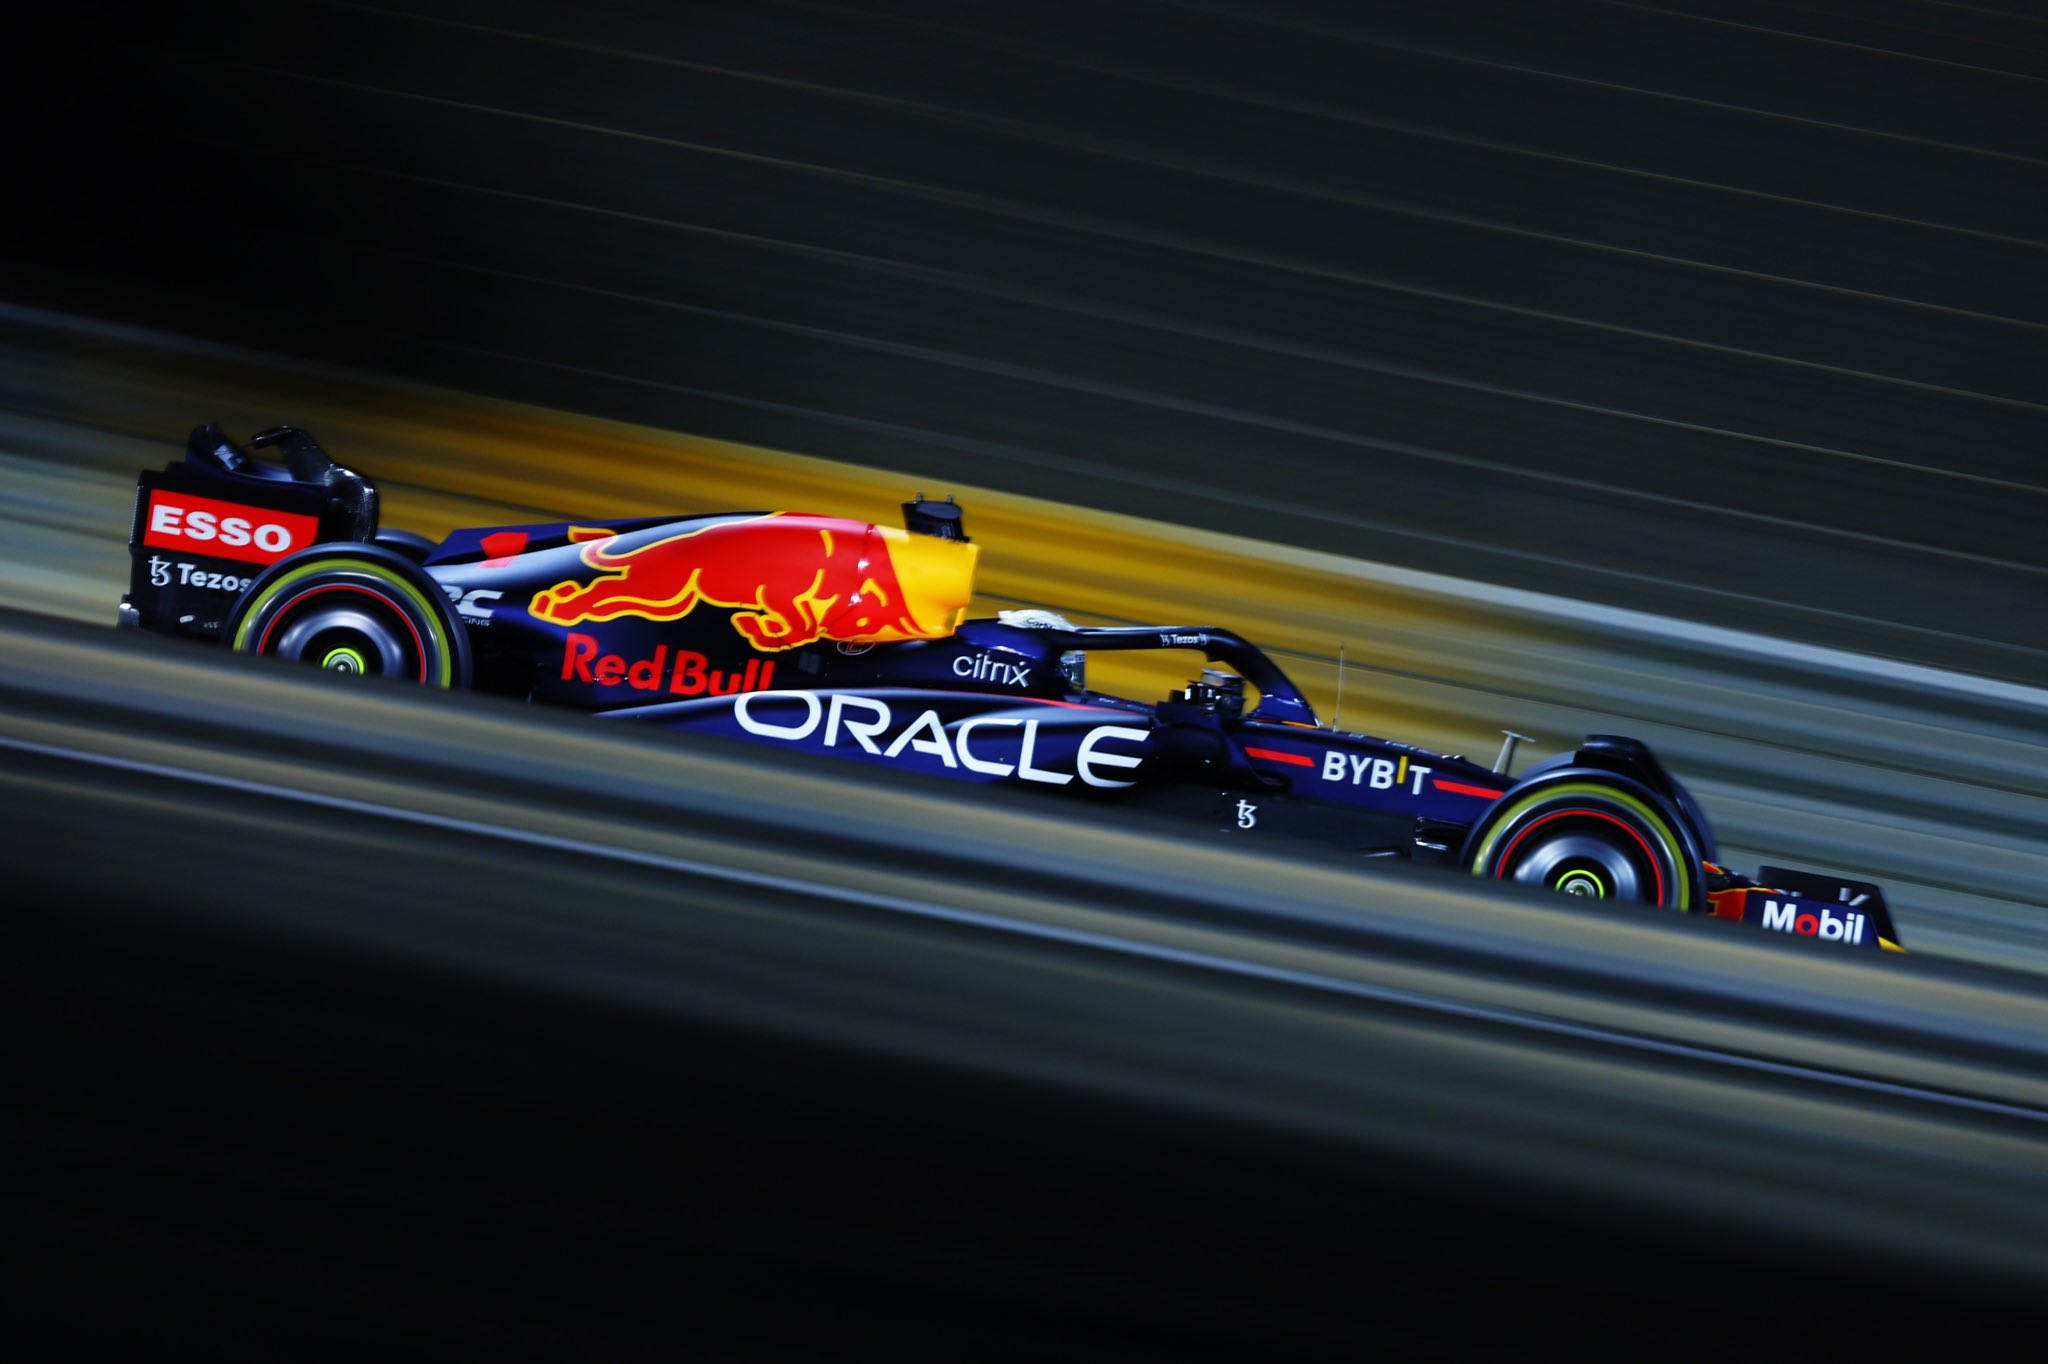 Oracle Red Bull Racing filter needed